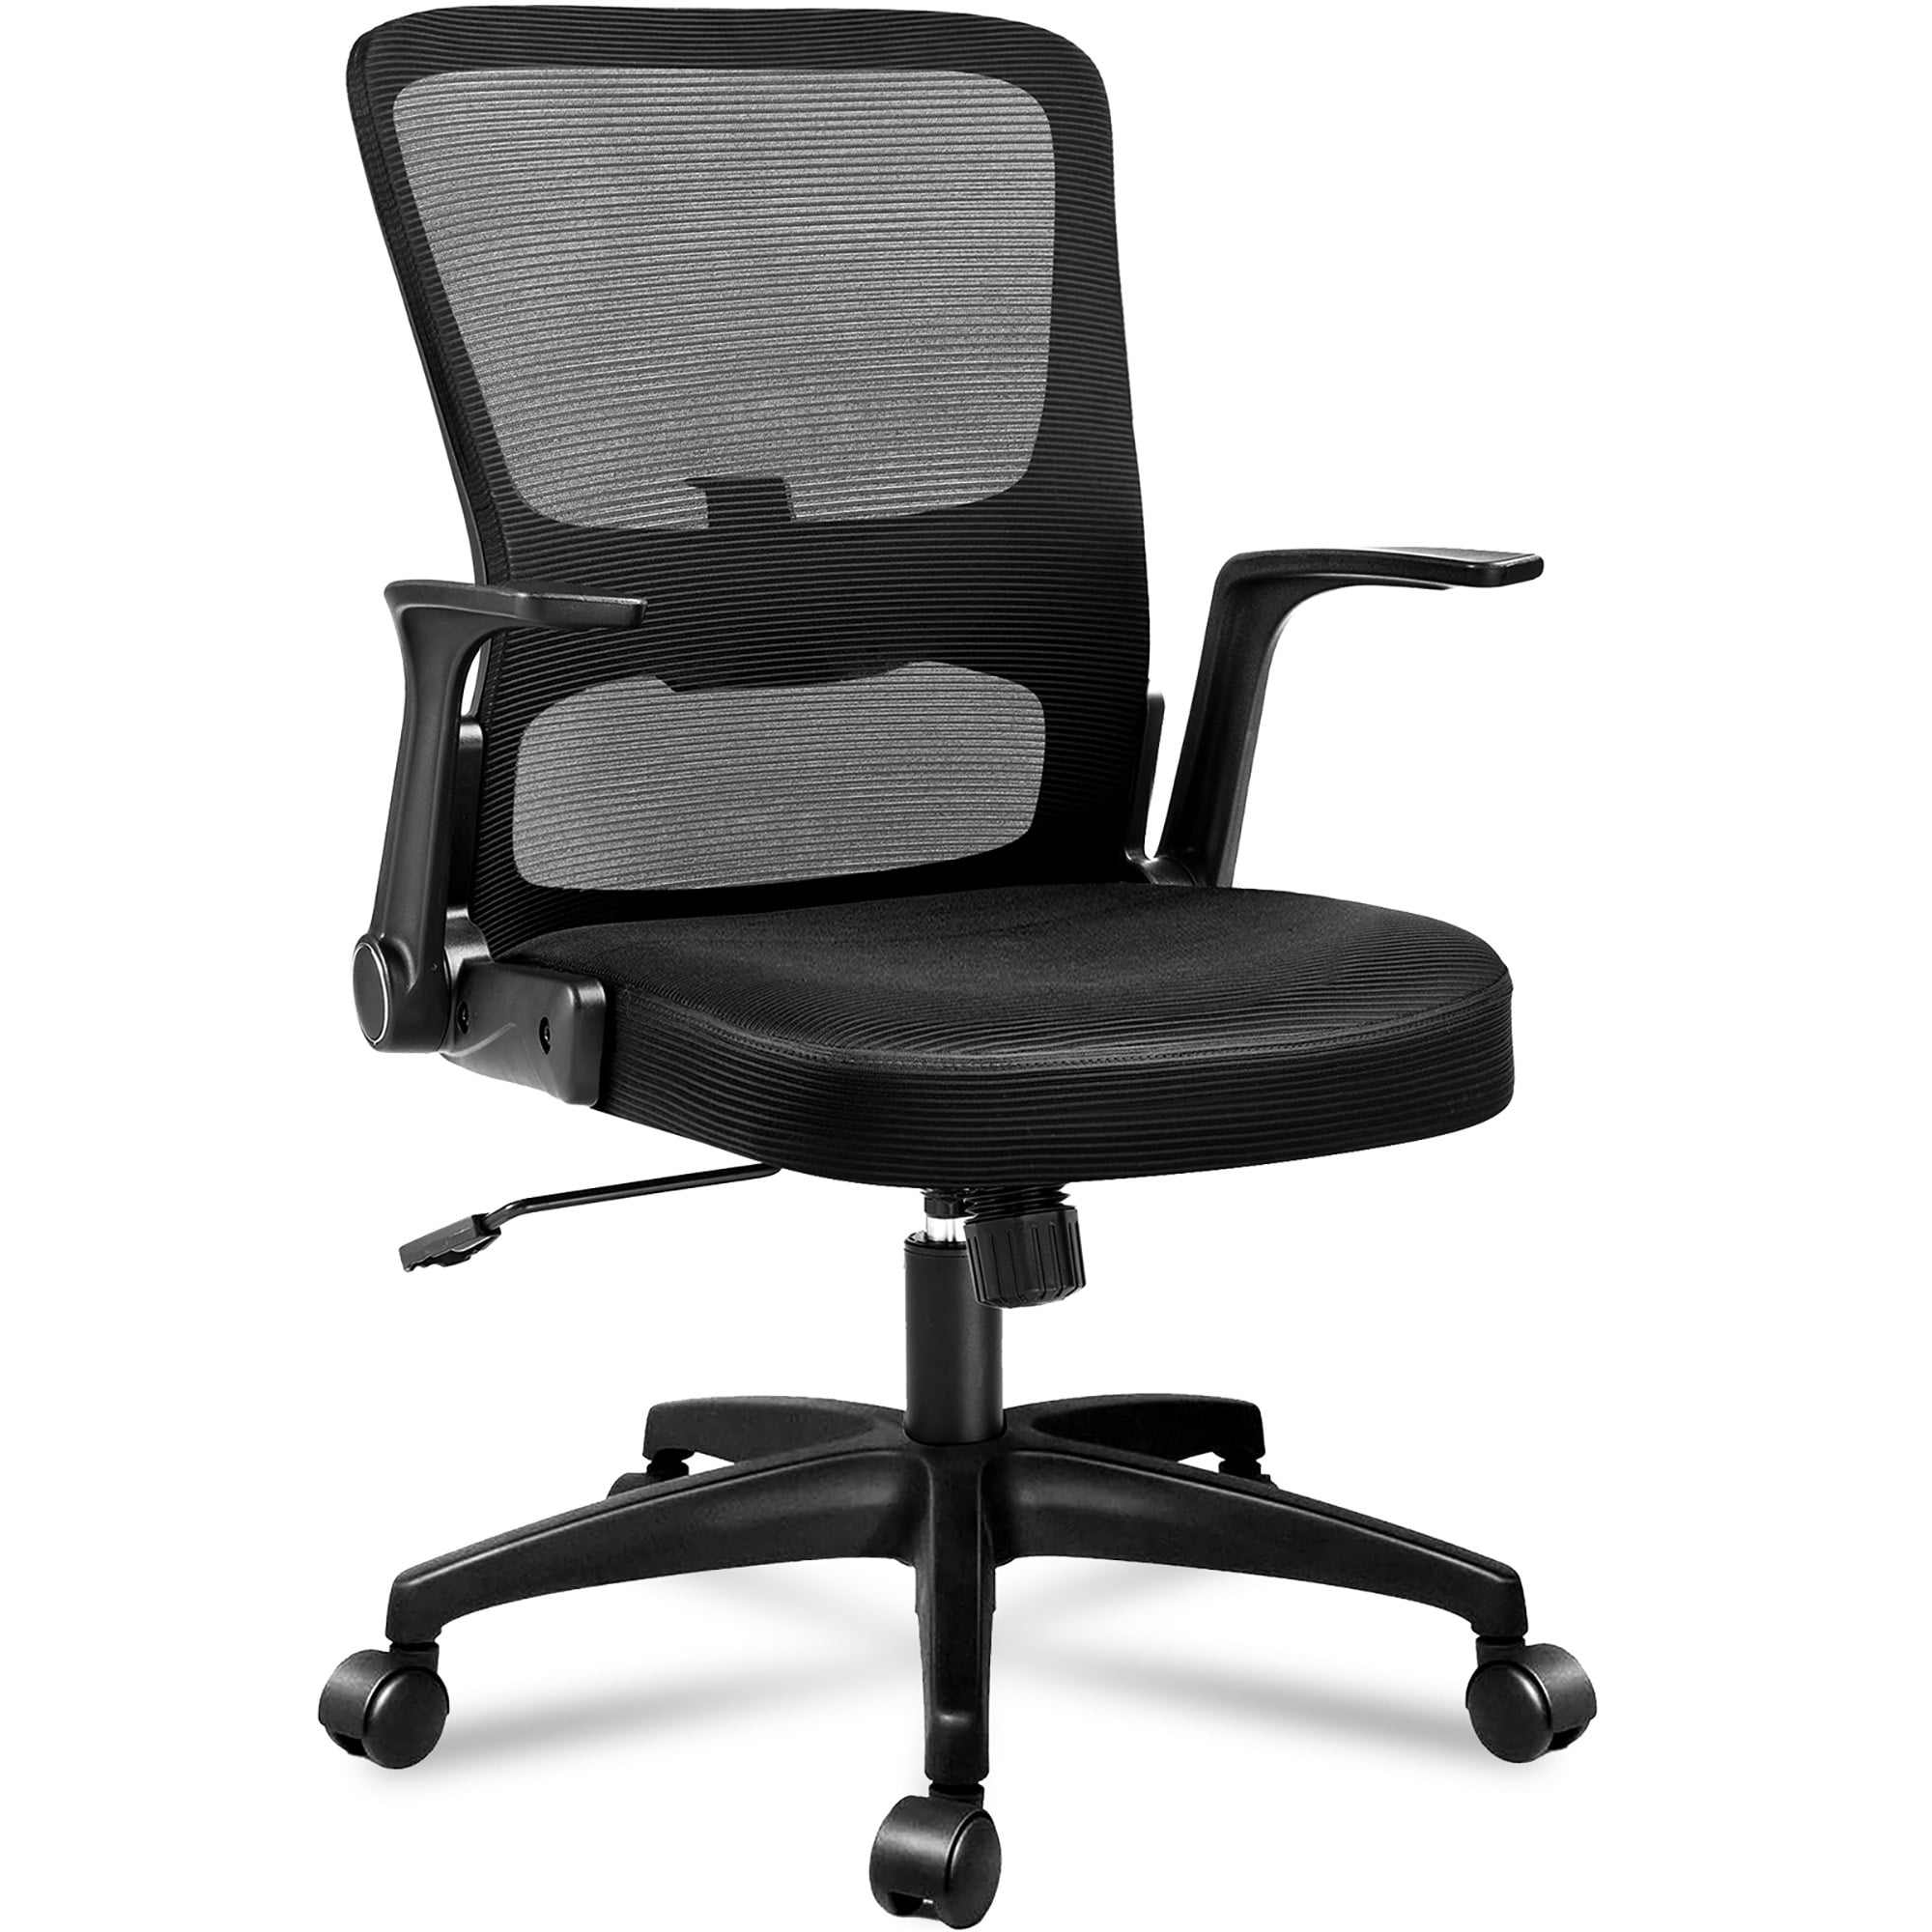 COMHOMA Office Desk Chair Mesh Ergonomic Mid-Back Lumbar Support Computer Swivel Chairs with Flip-Up Armrests & Wheels for Conference Home Office Gray